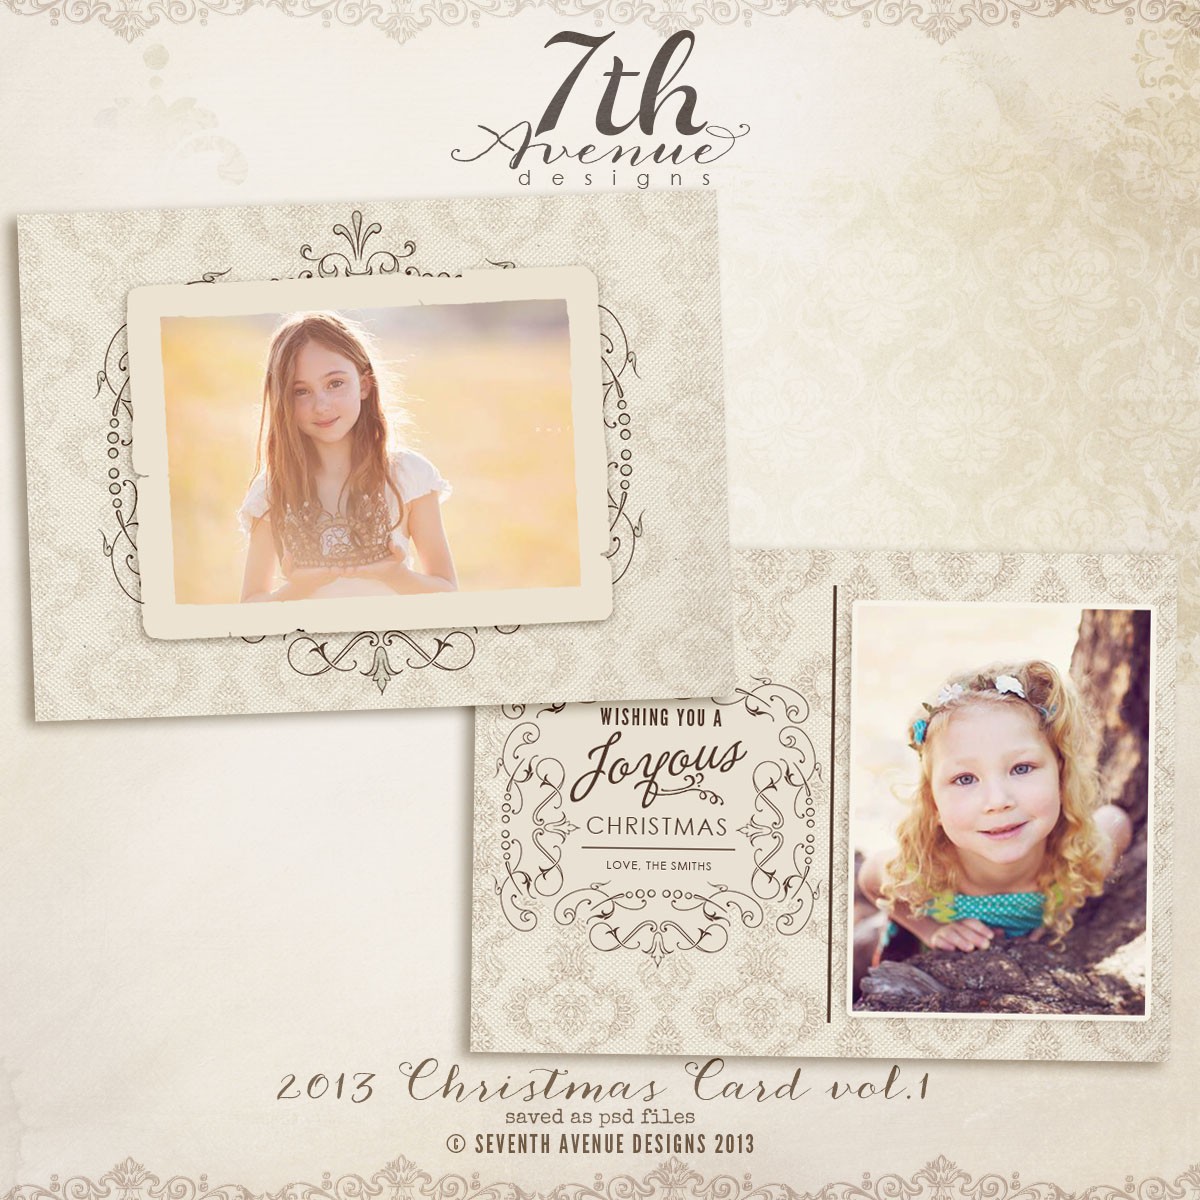 2013 Christmas Card Templates Vol 1 Cc2013 4 00 7thAvenue Free For Photographers